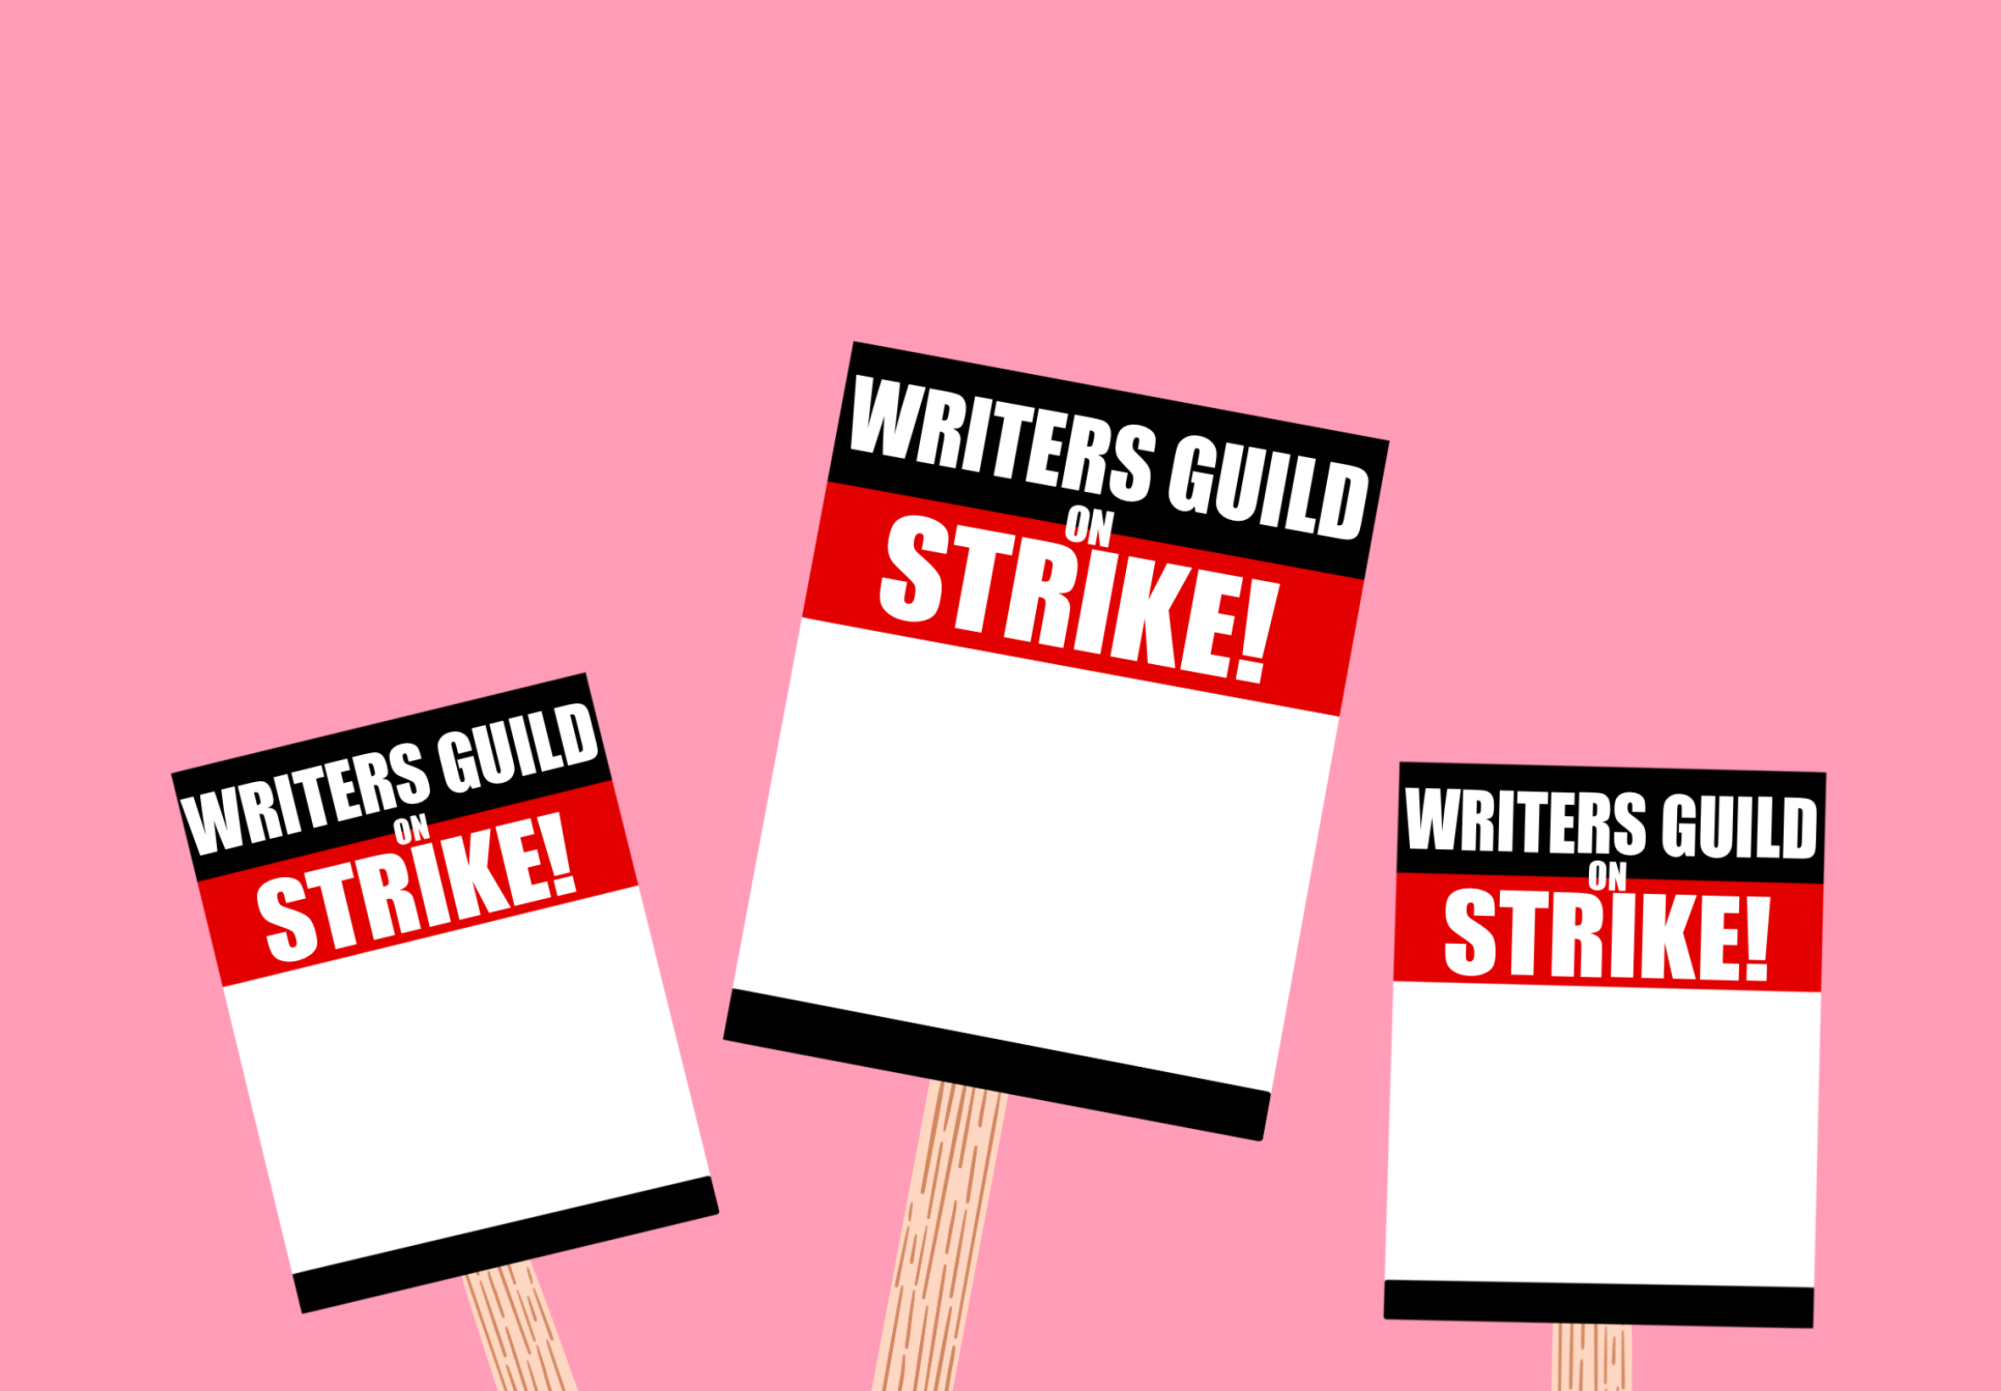 The WGA and SAG-AFTRA strike passes the 100 day mark.